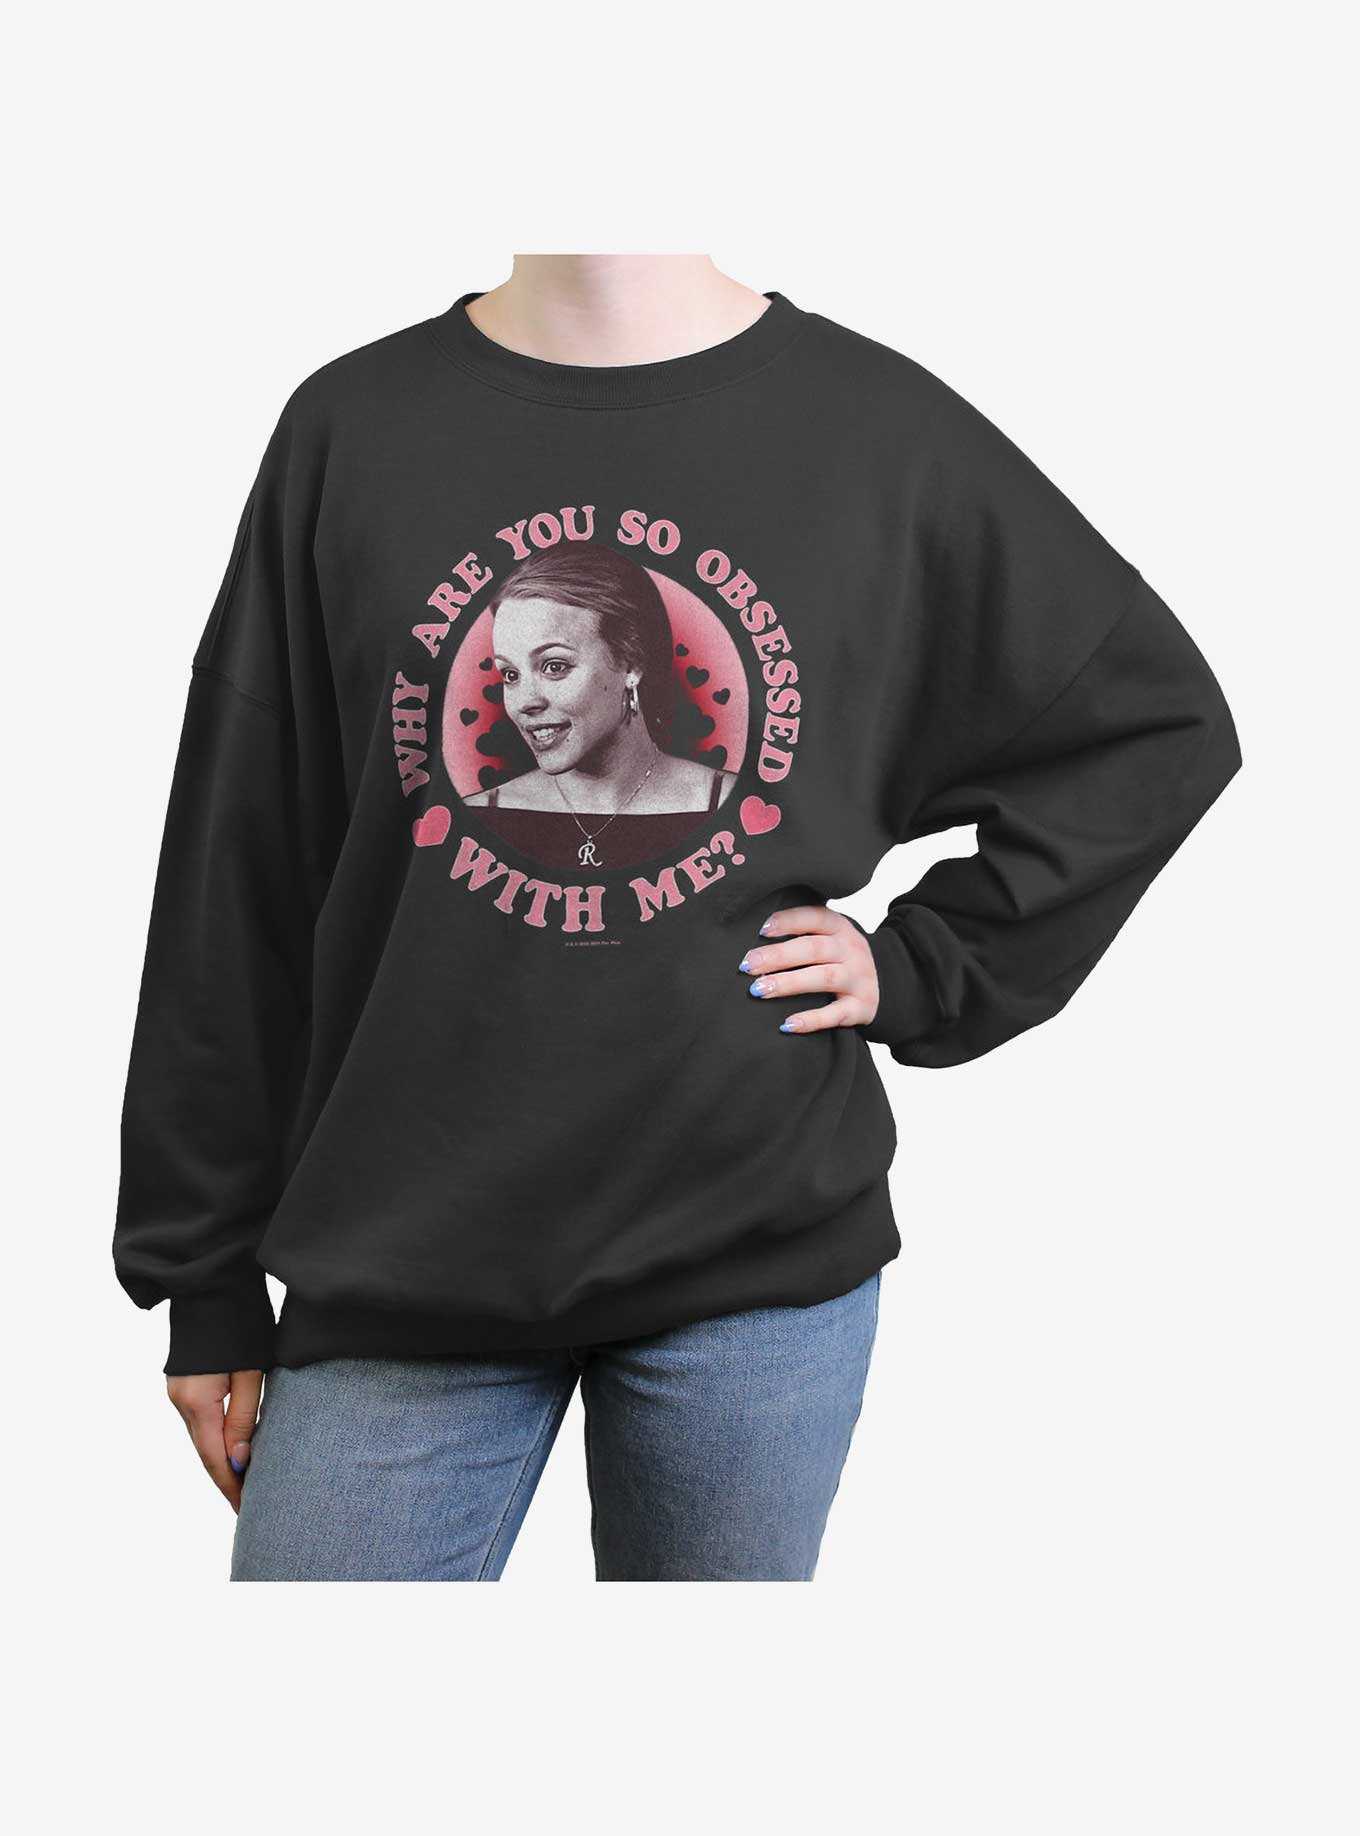 Mean Girls Obsessed With Me Womens Oversized Sweatshirt, , hi-res